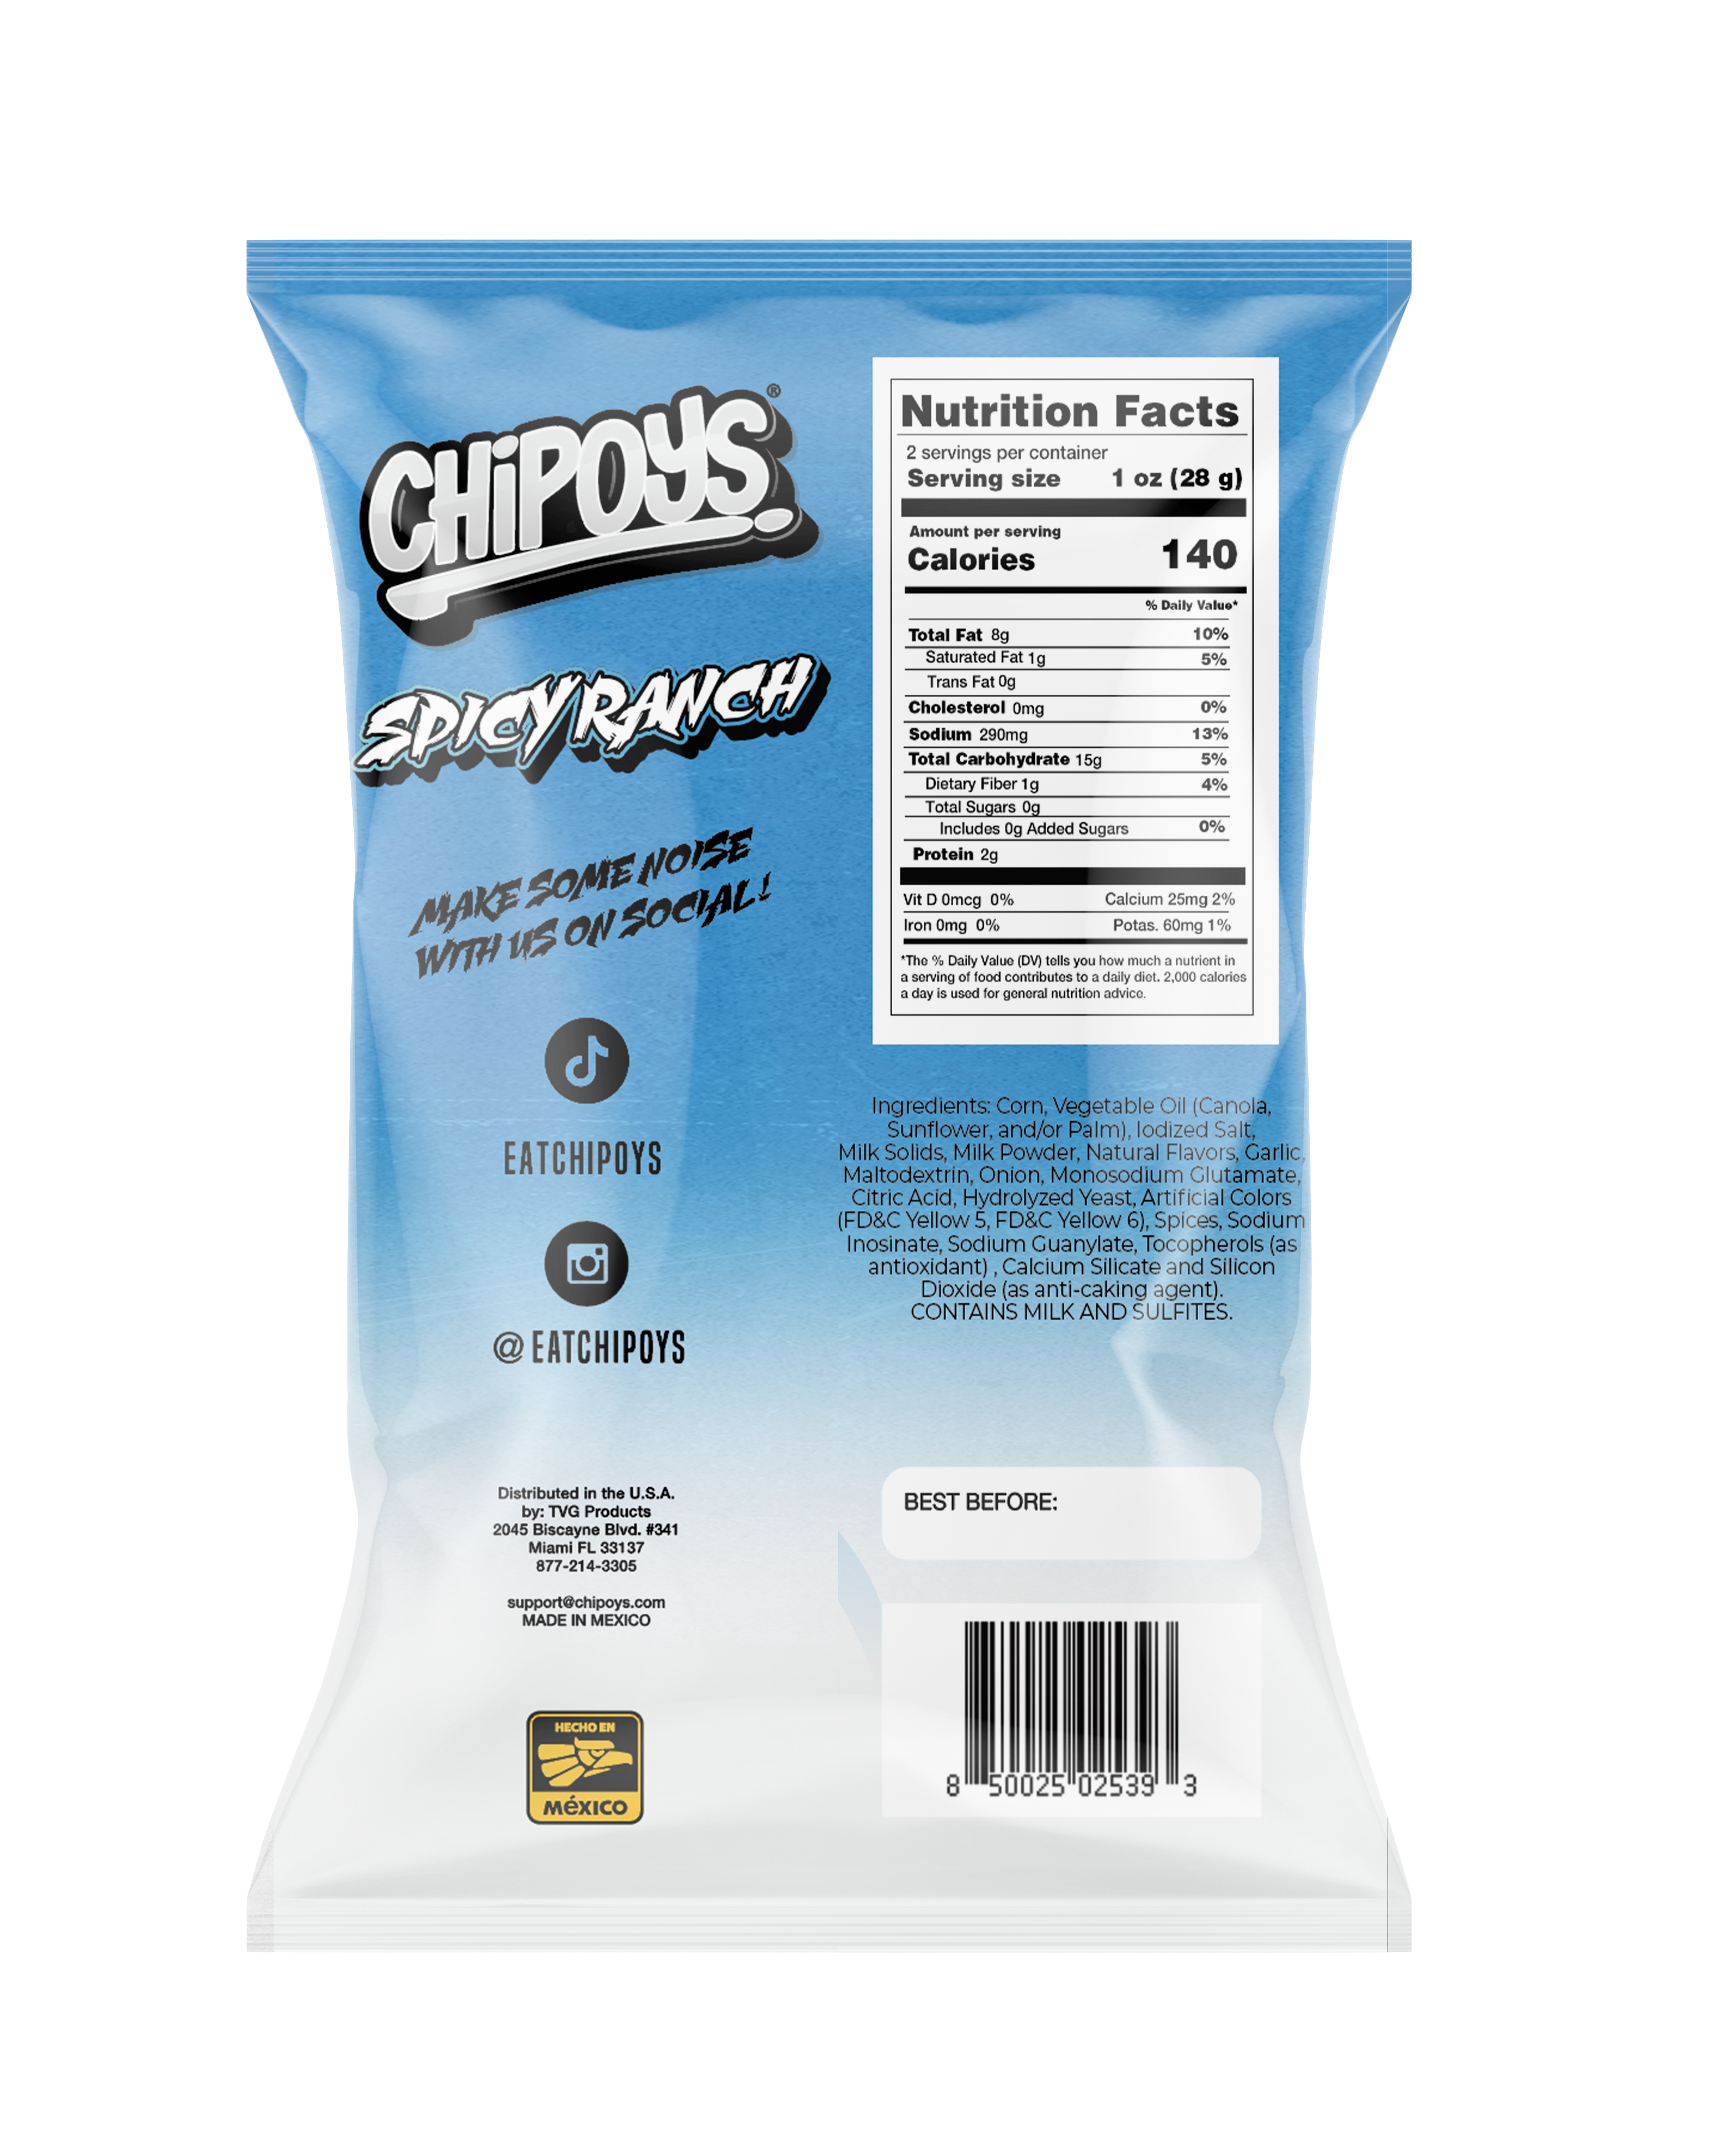 CHIPOYS Spicy Ranch 2 oz 12 innerpacks per case 57 g